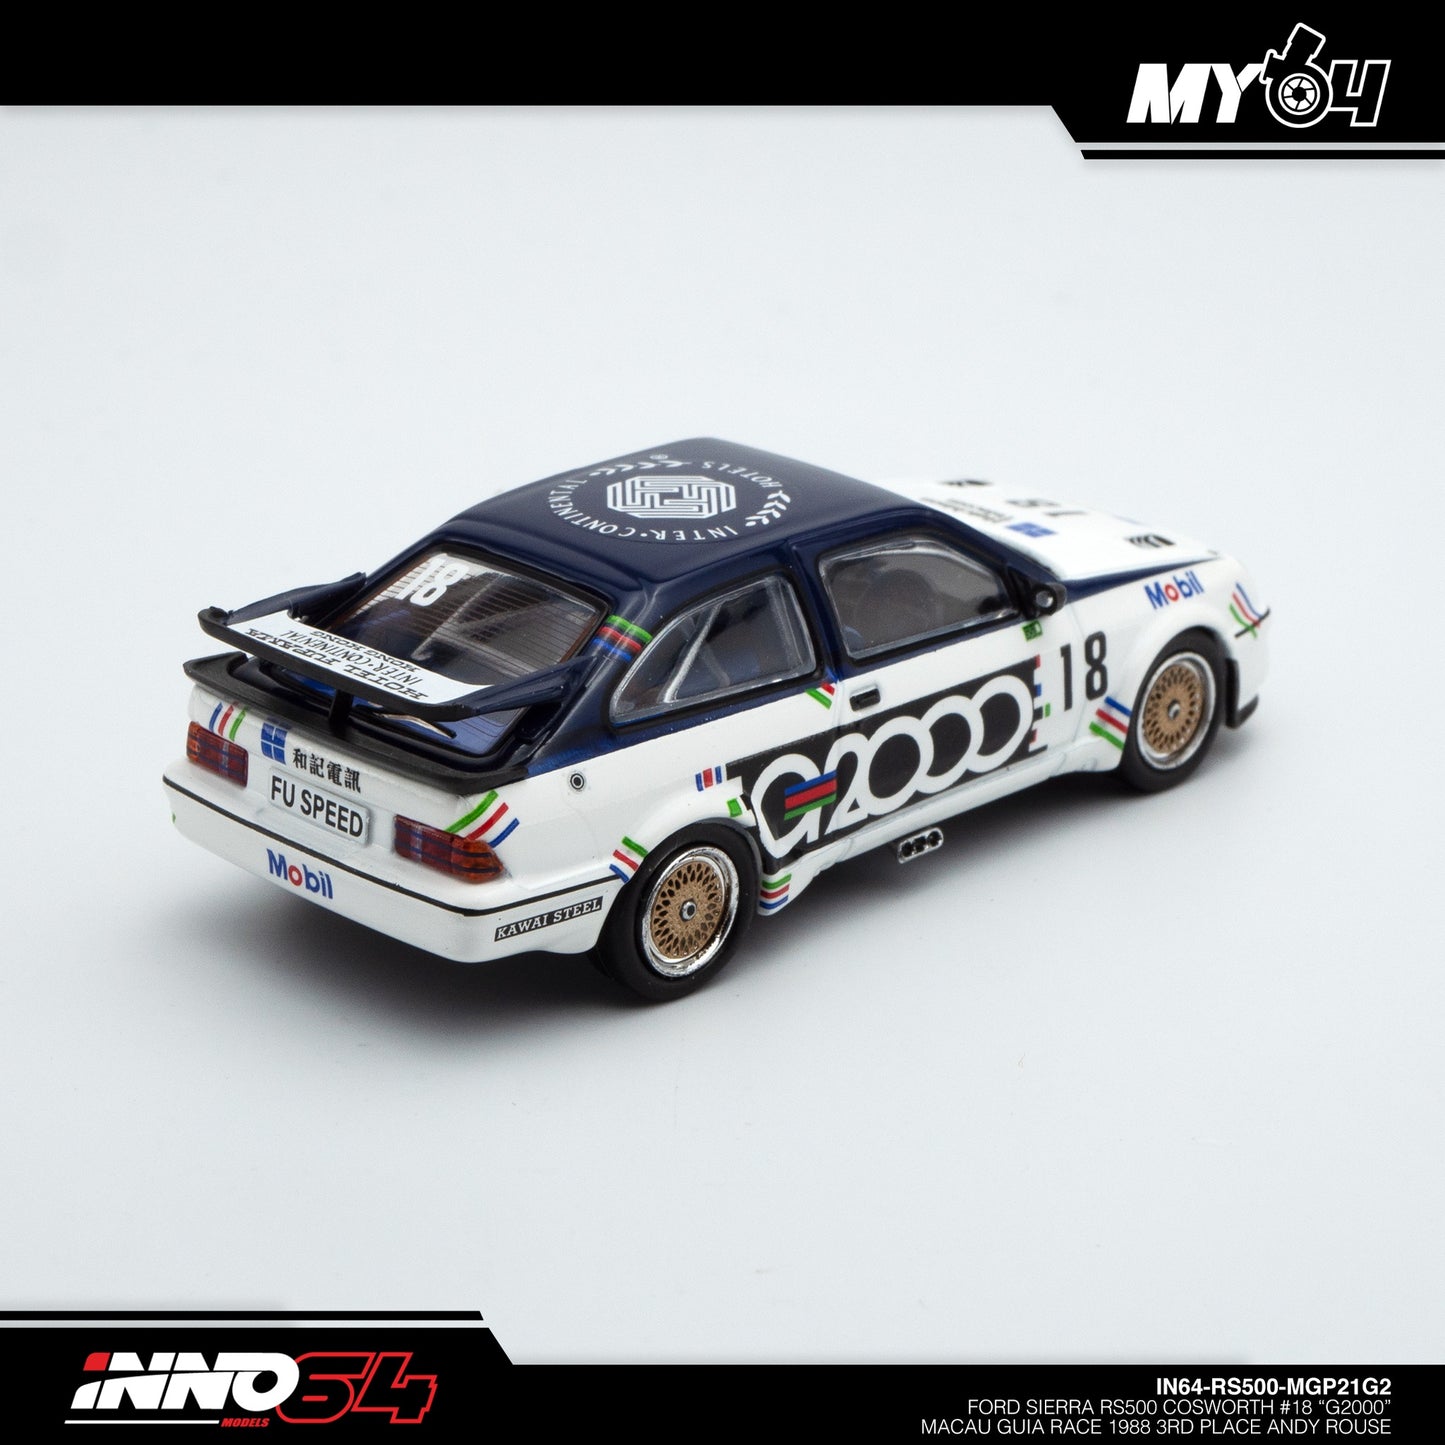 [INNO64] Ford Sierra Cosworth RS500 #18 "G2000" Macau Guia Race 1988 3rd Place Andy Rouse